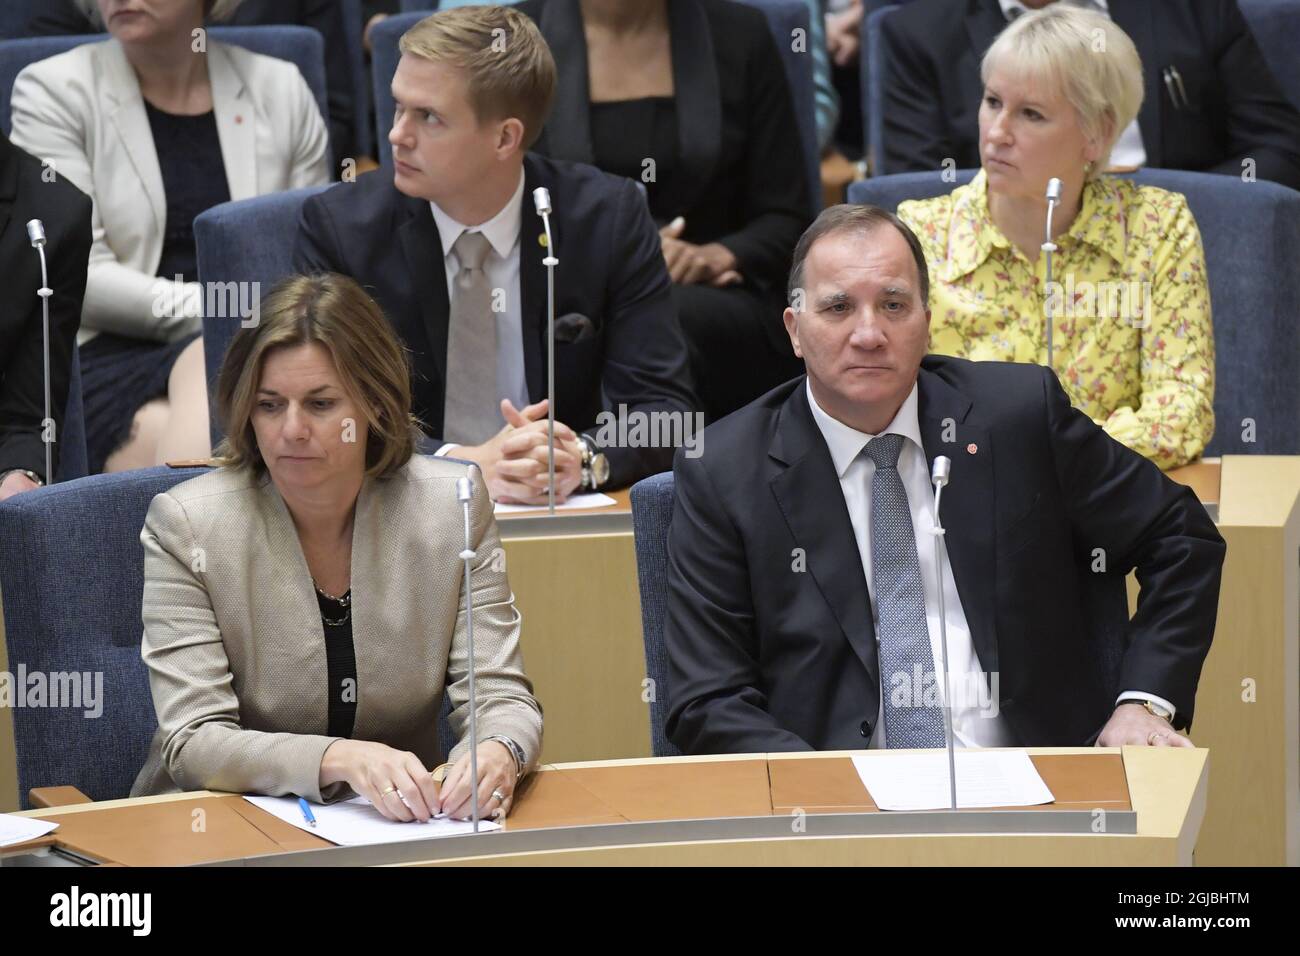 Swedish Prime Minister Stefan Lofven were ousted in no-confidence vote in the Swedish Parliament Riksdagen Tuesday 25 September. A total of 204 of Sweden's 349 members of parliament voted no to Lofven as prime minister. Seated next to Lovfen is deputy Prime Minister Isabella Lovin. Photo: Anders Wiklund / TT kod 10040  Stock Photo